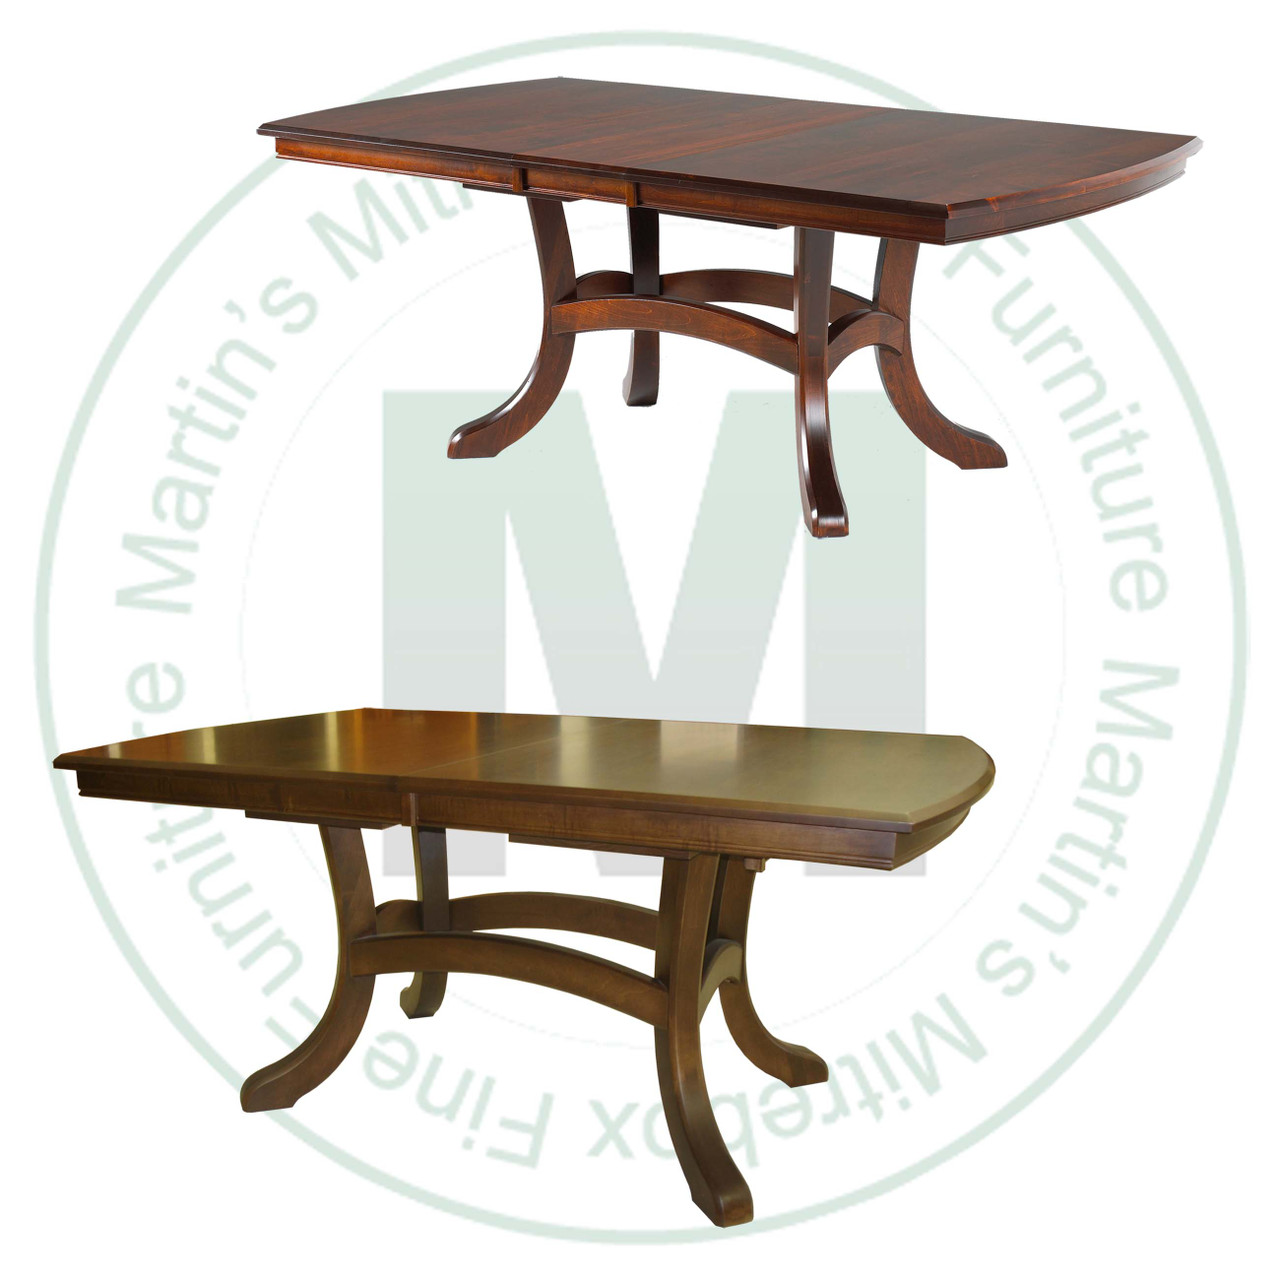 Maple Jordan Double Pedestal Table 42''D x 96''W x 30''H With 2 - 12'' Leaves. Table Has 1'' Thick Top